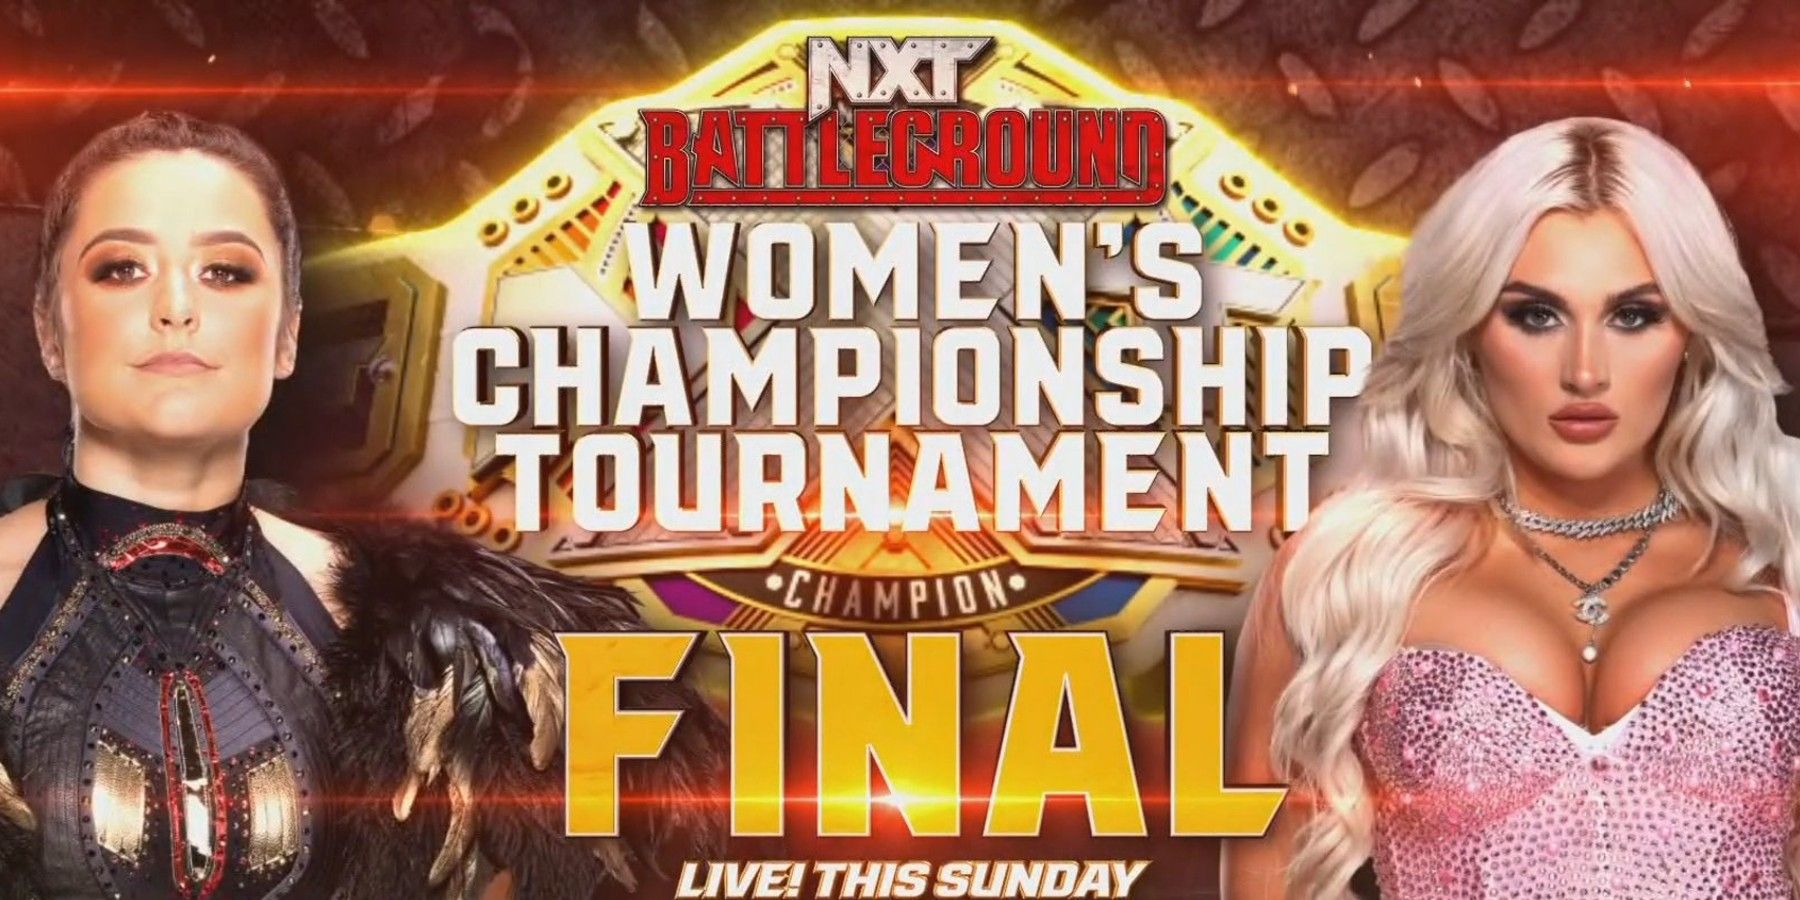 Lyra Valkyria and Tiffany Stratton NXT Battleground 2023 graphic for the NXT Championship